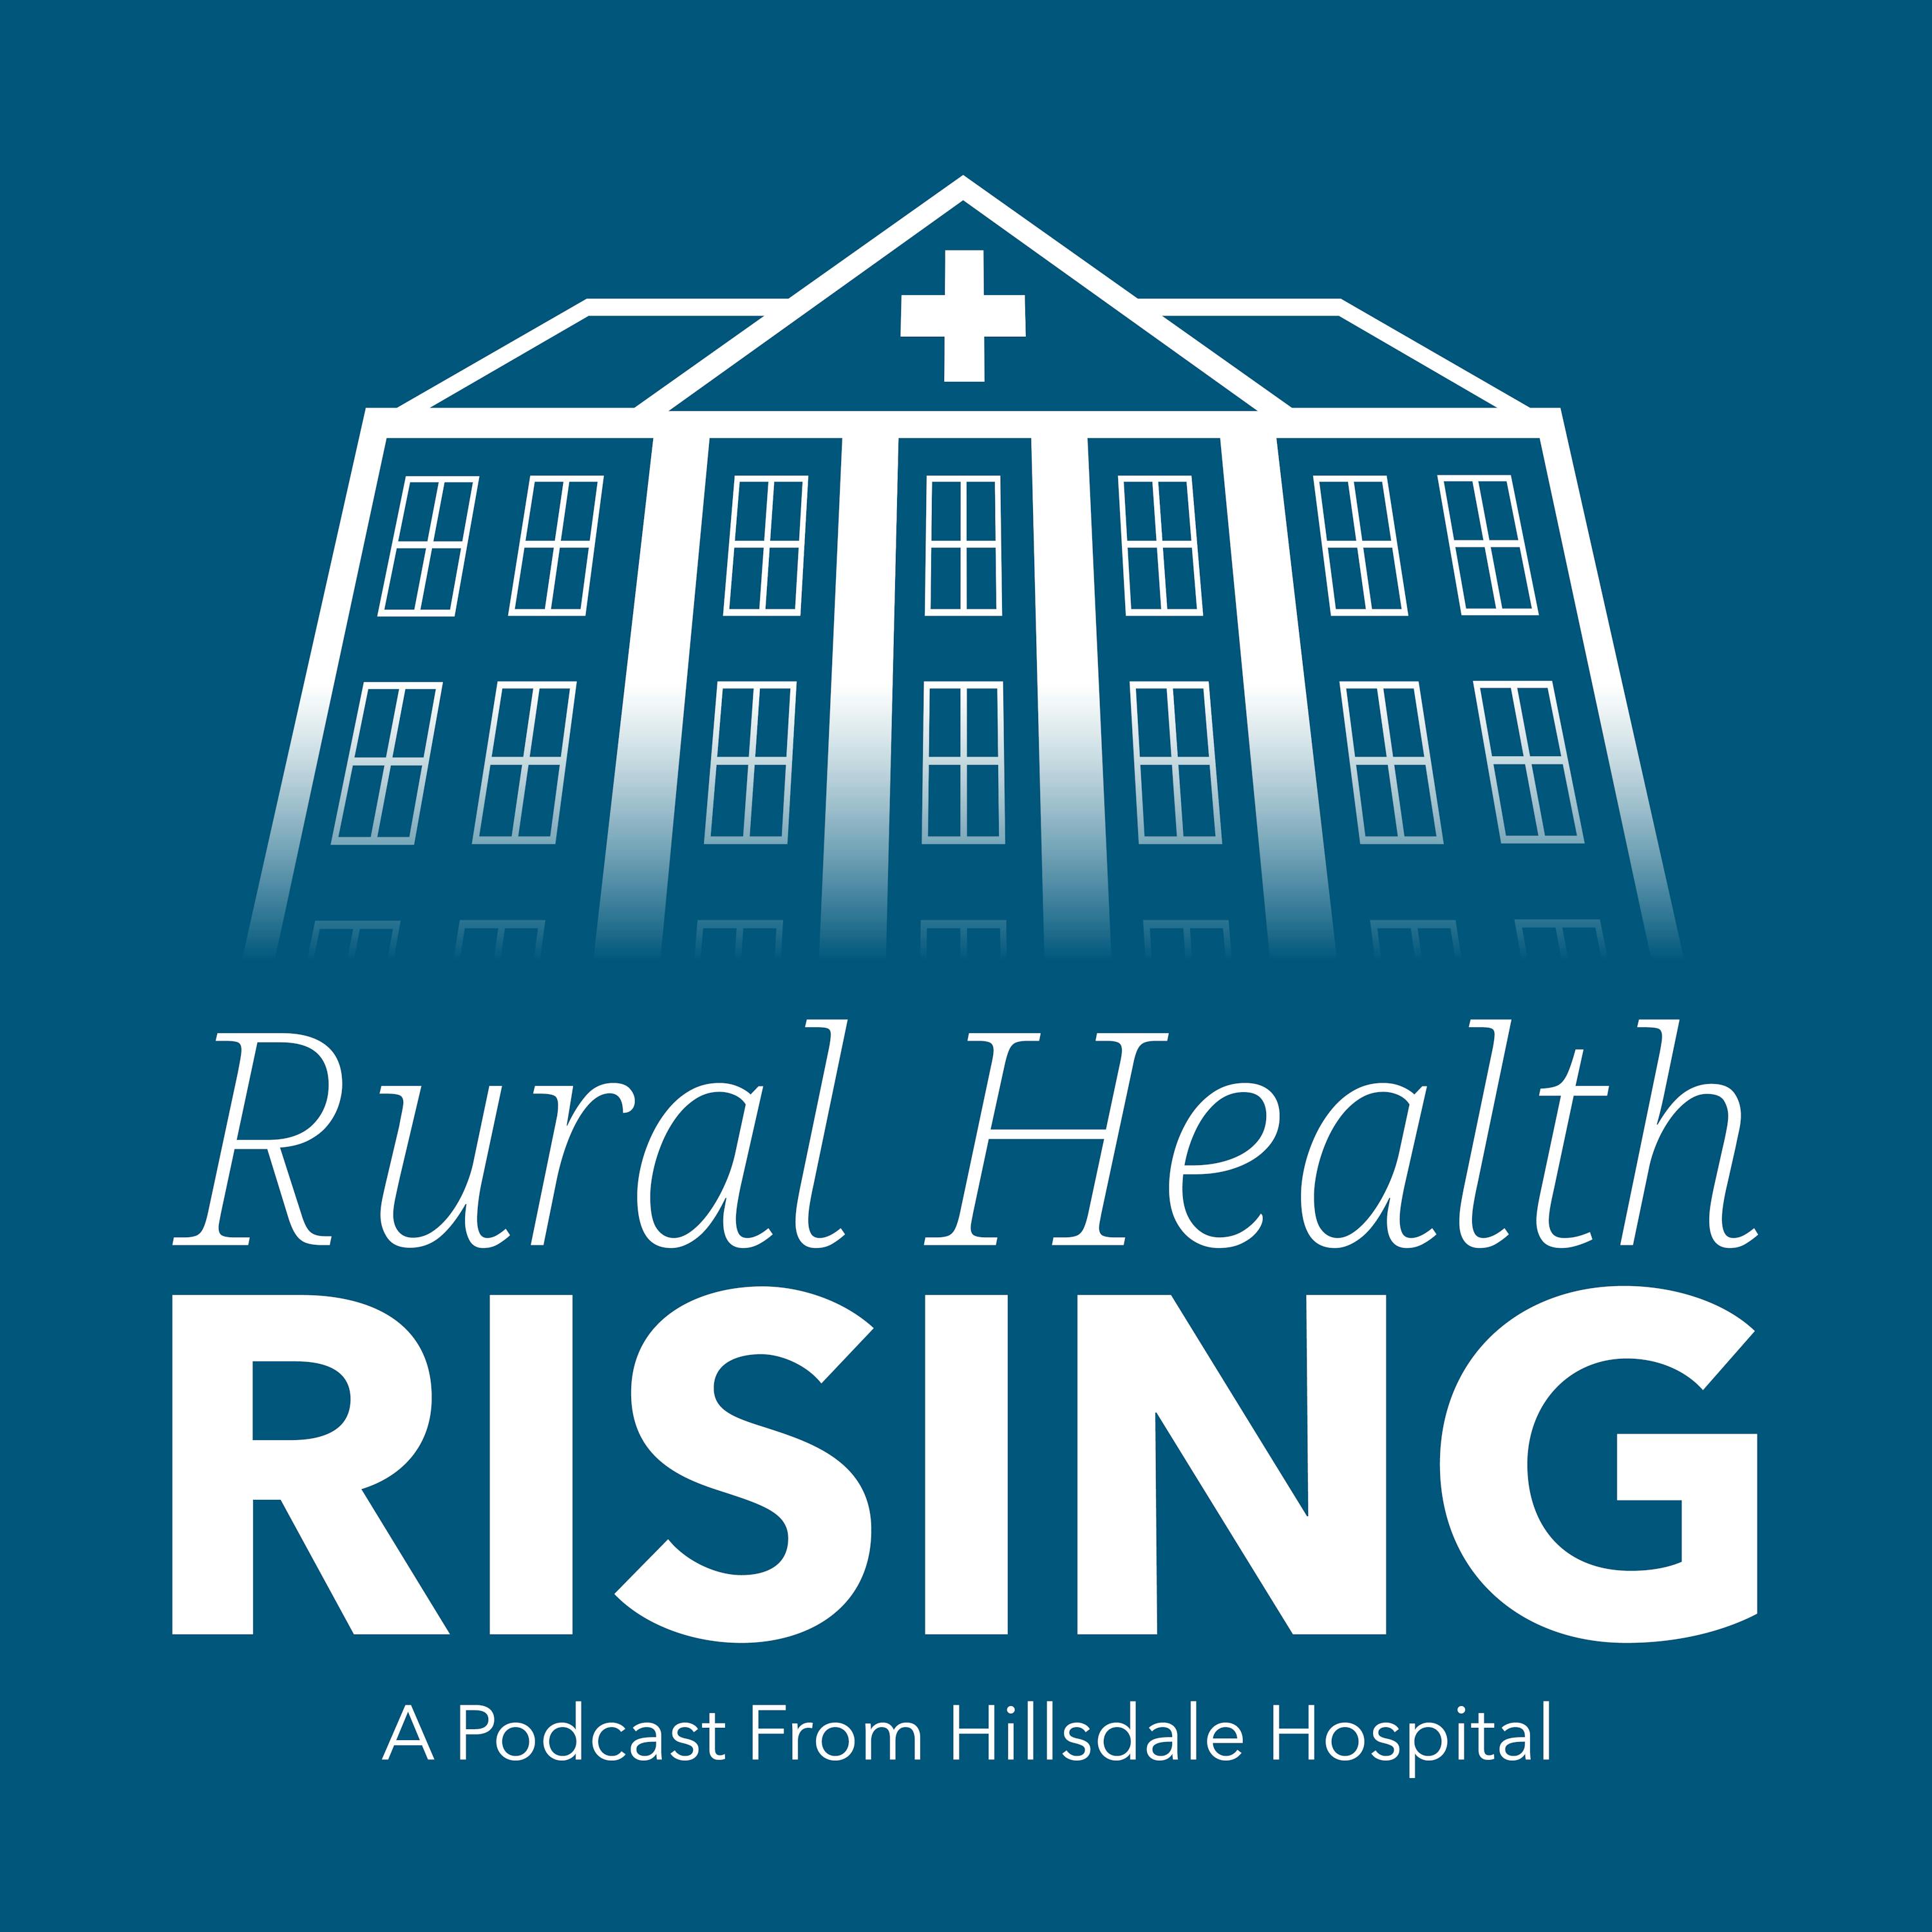 Episode 81: Reducing Transfers from Rural Hospitals